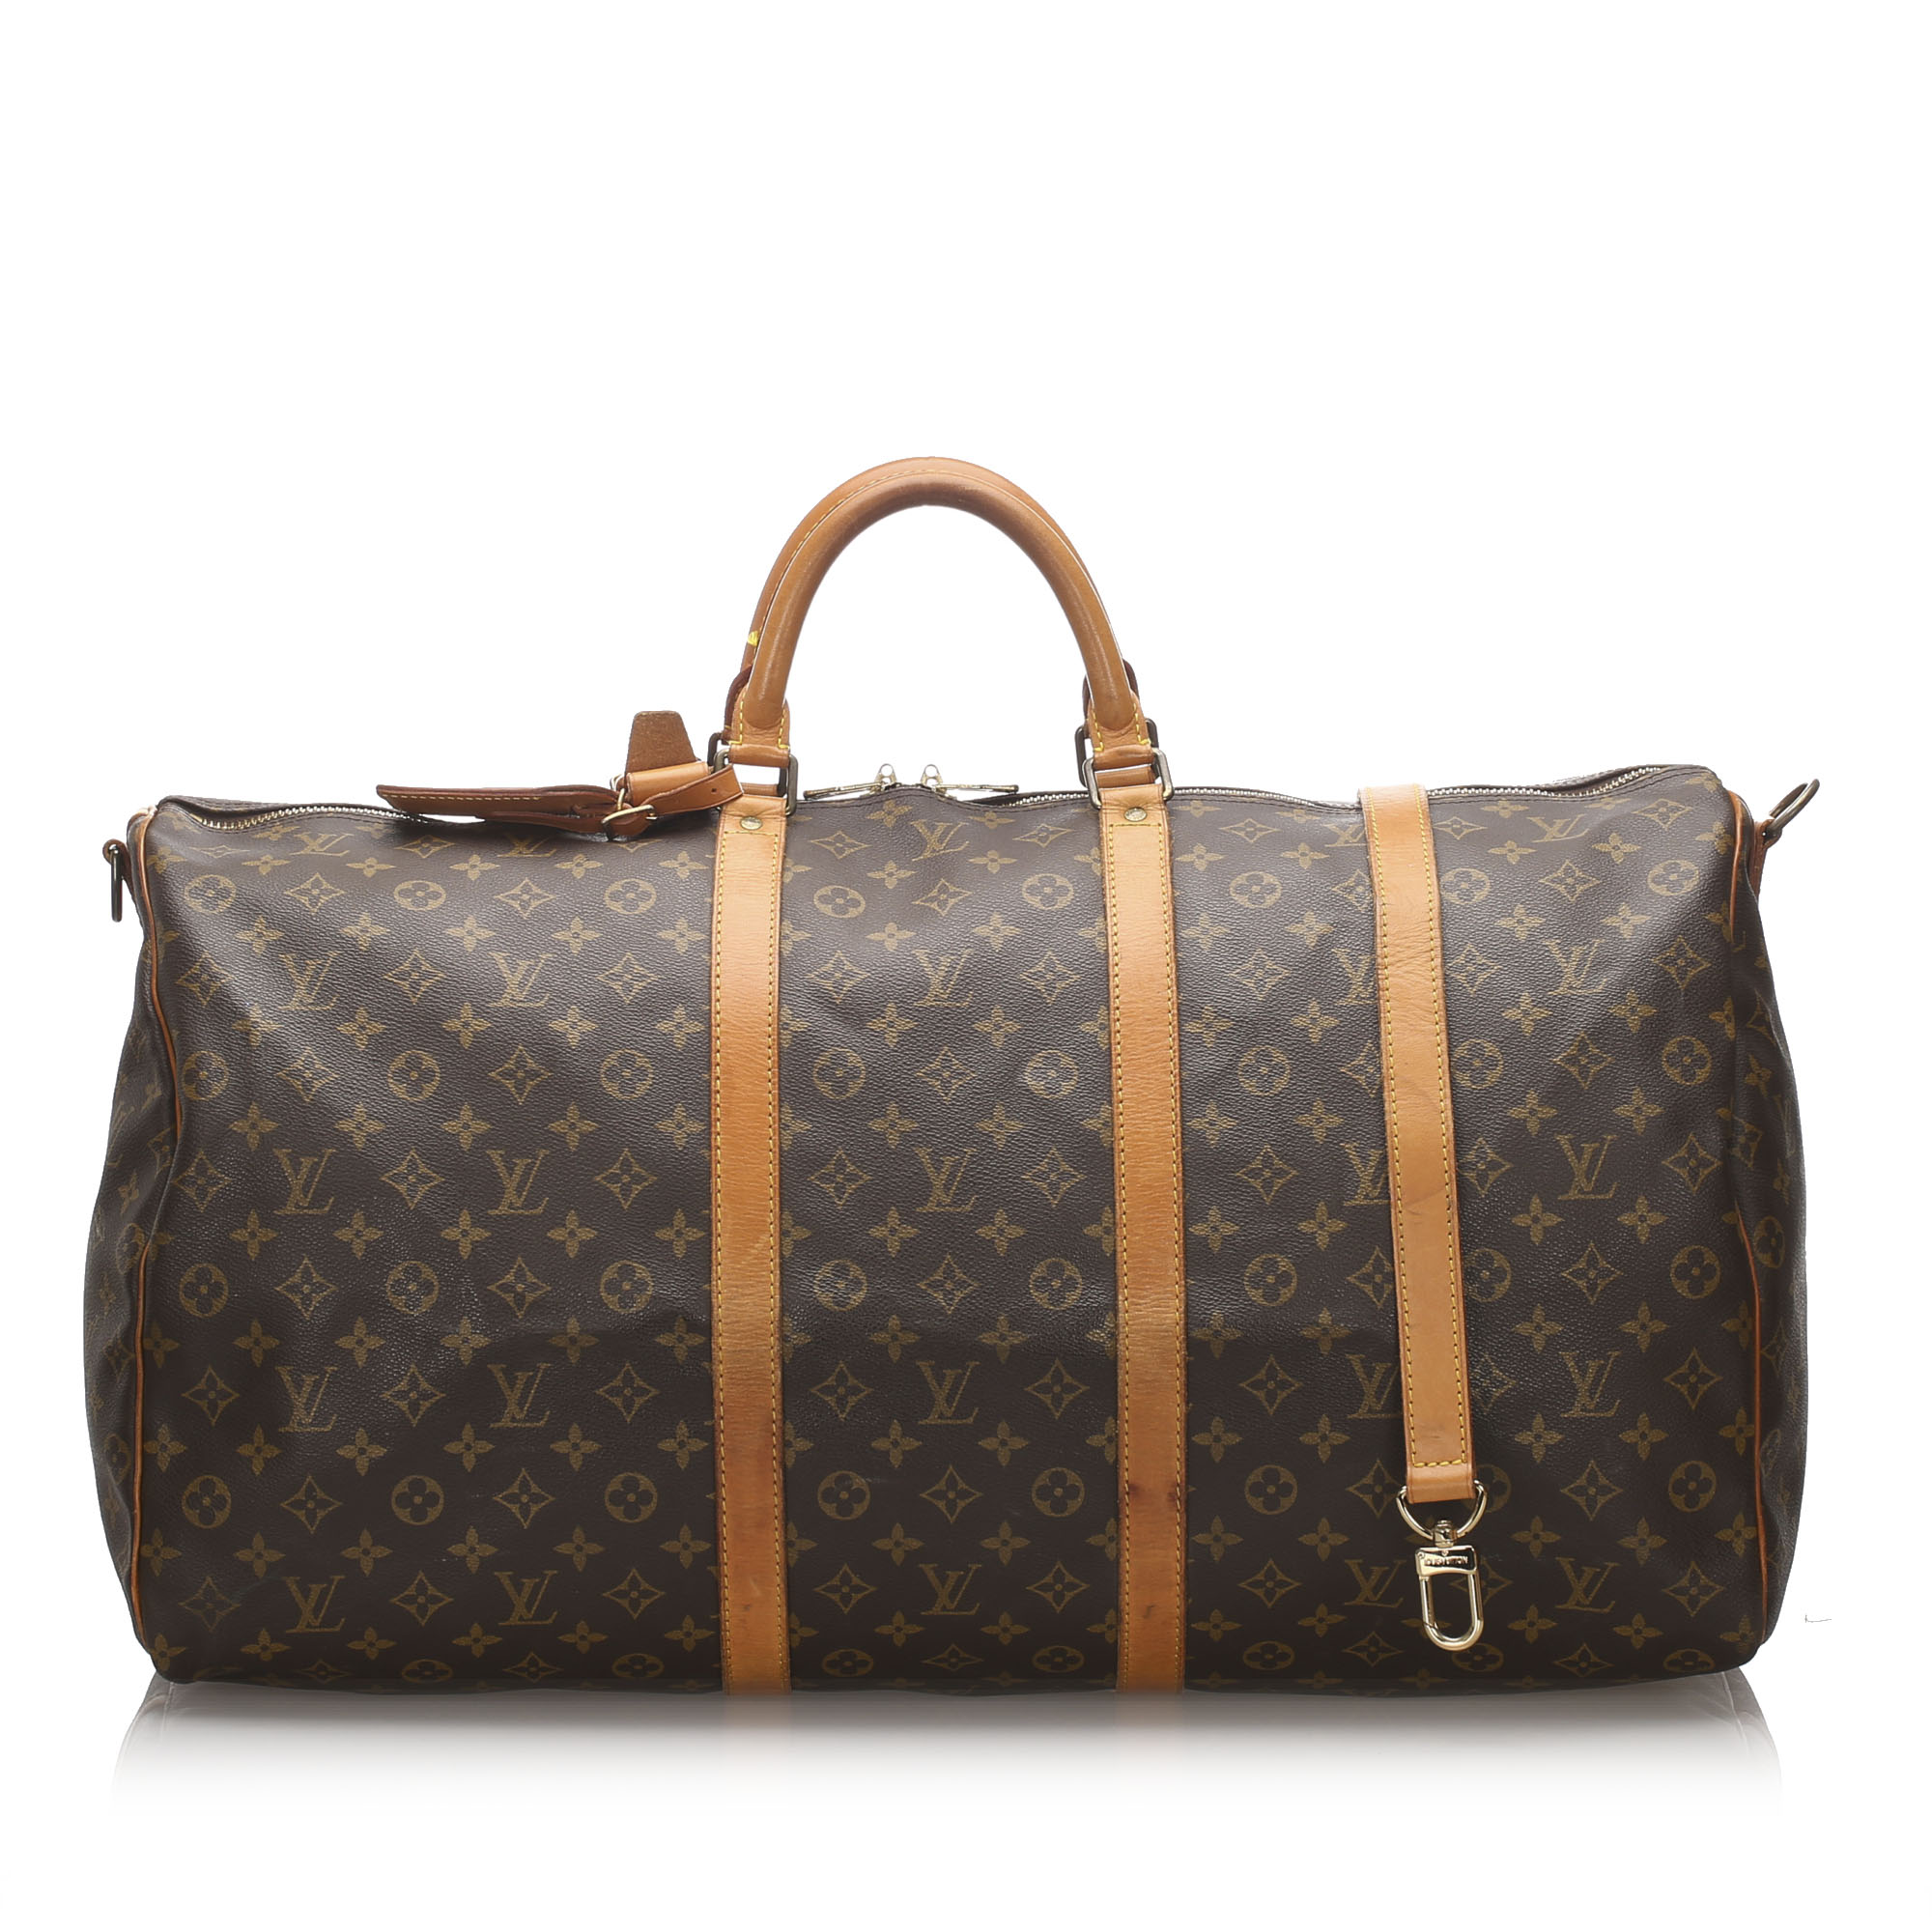 Pre-Loved Louis Vuitton Brown Monogram Keepall Bandouliere 60 France | eBay